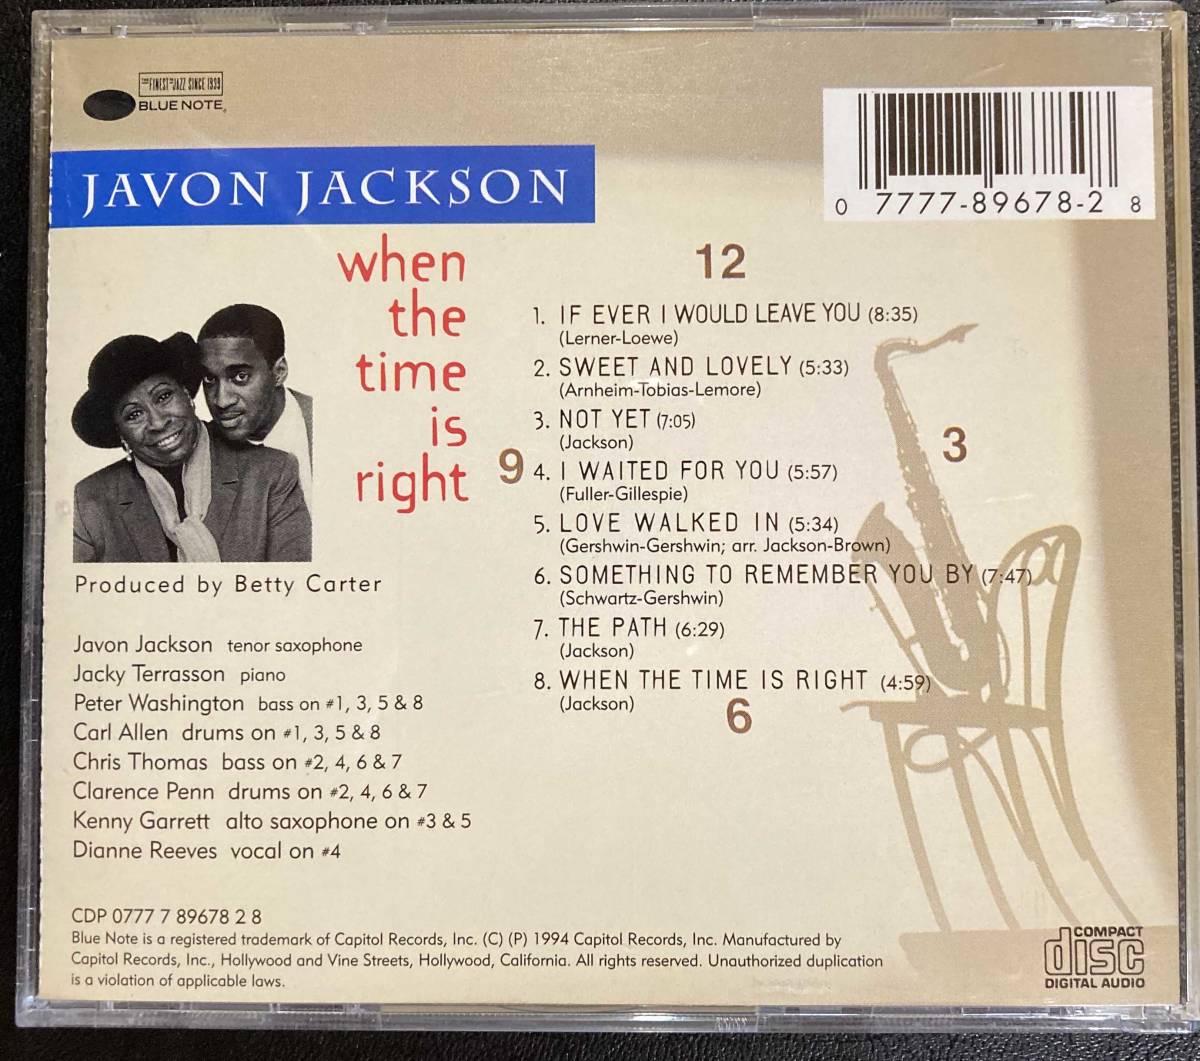 When the Time Is Right / Javon Jackson 中古CD　輸入盤　BLUE NOTE_画像3